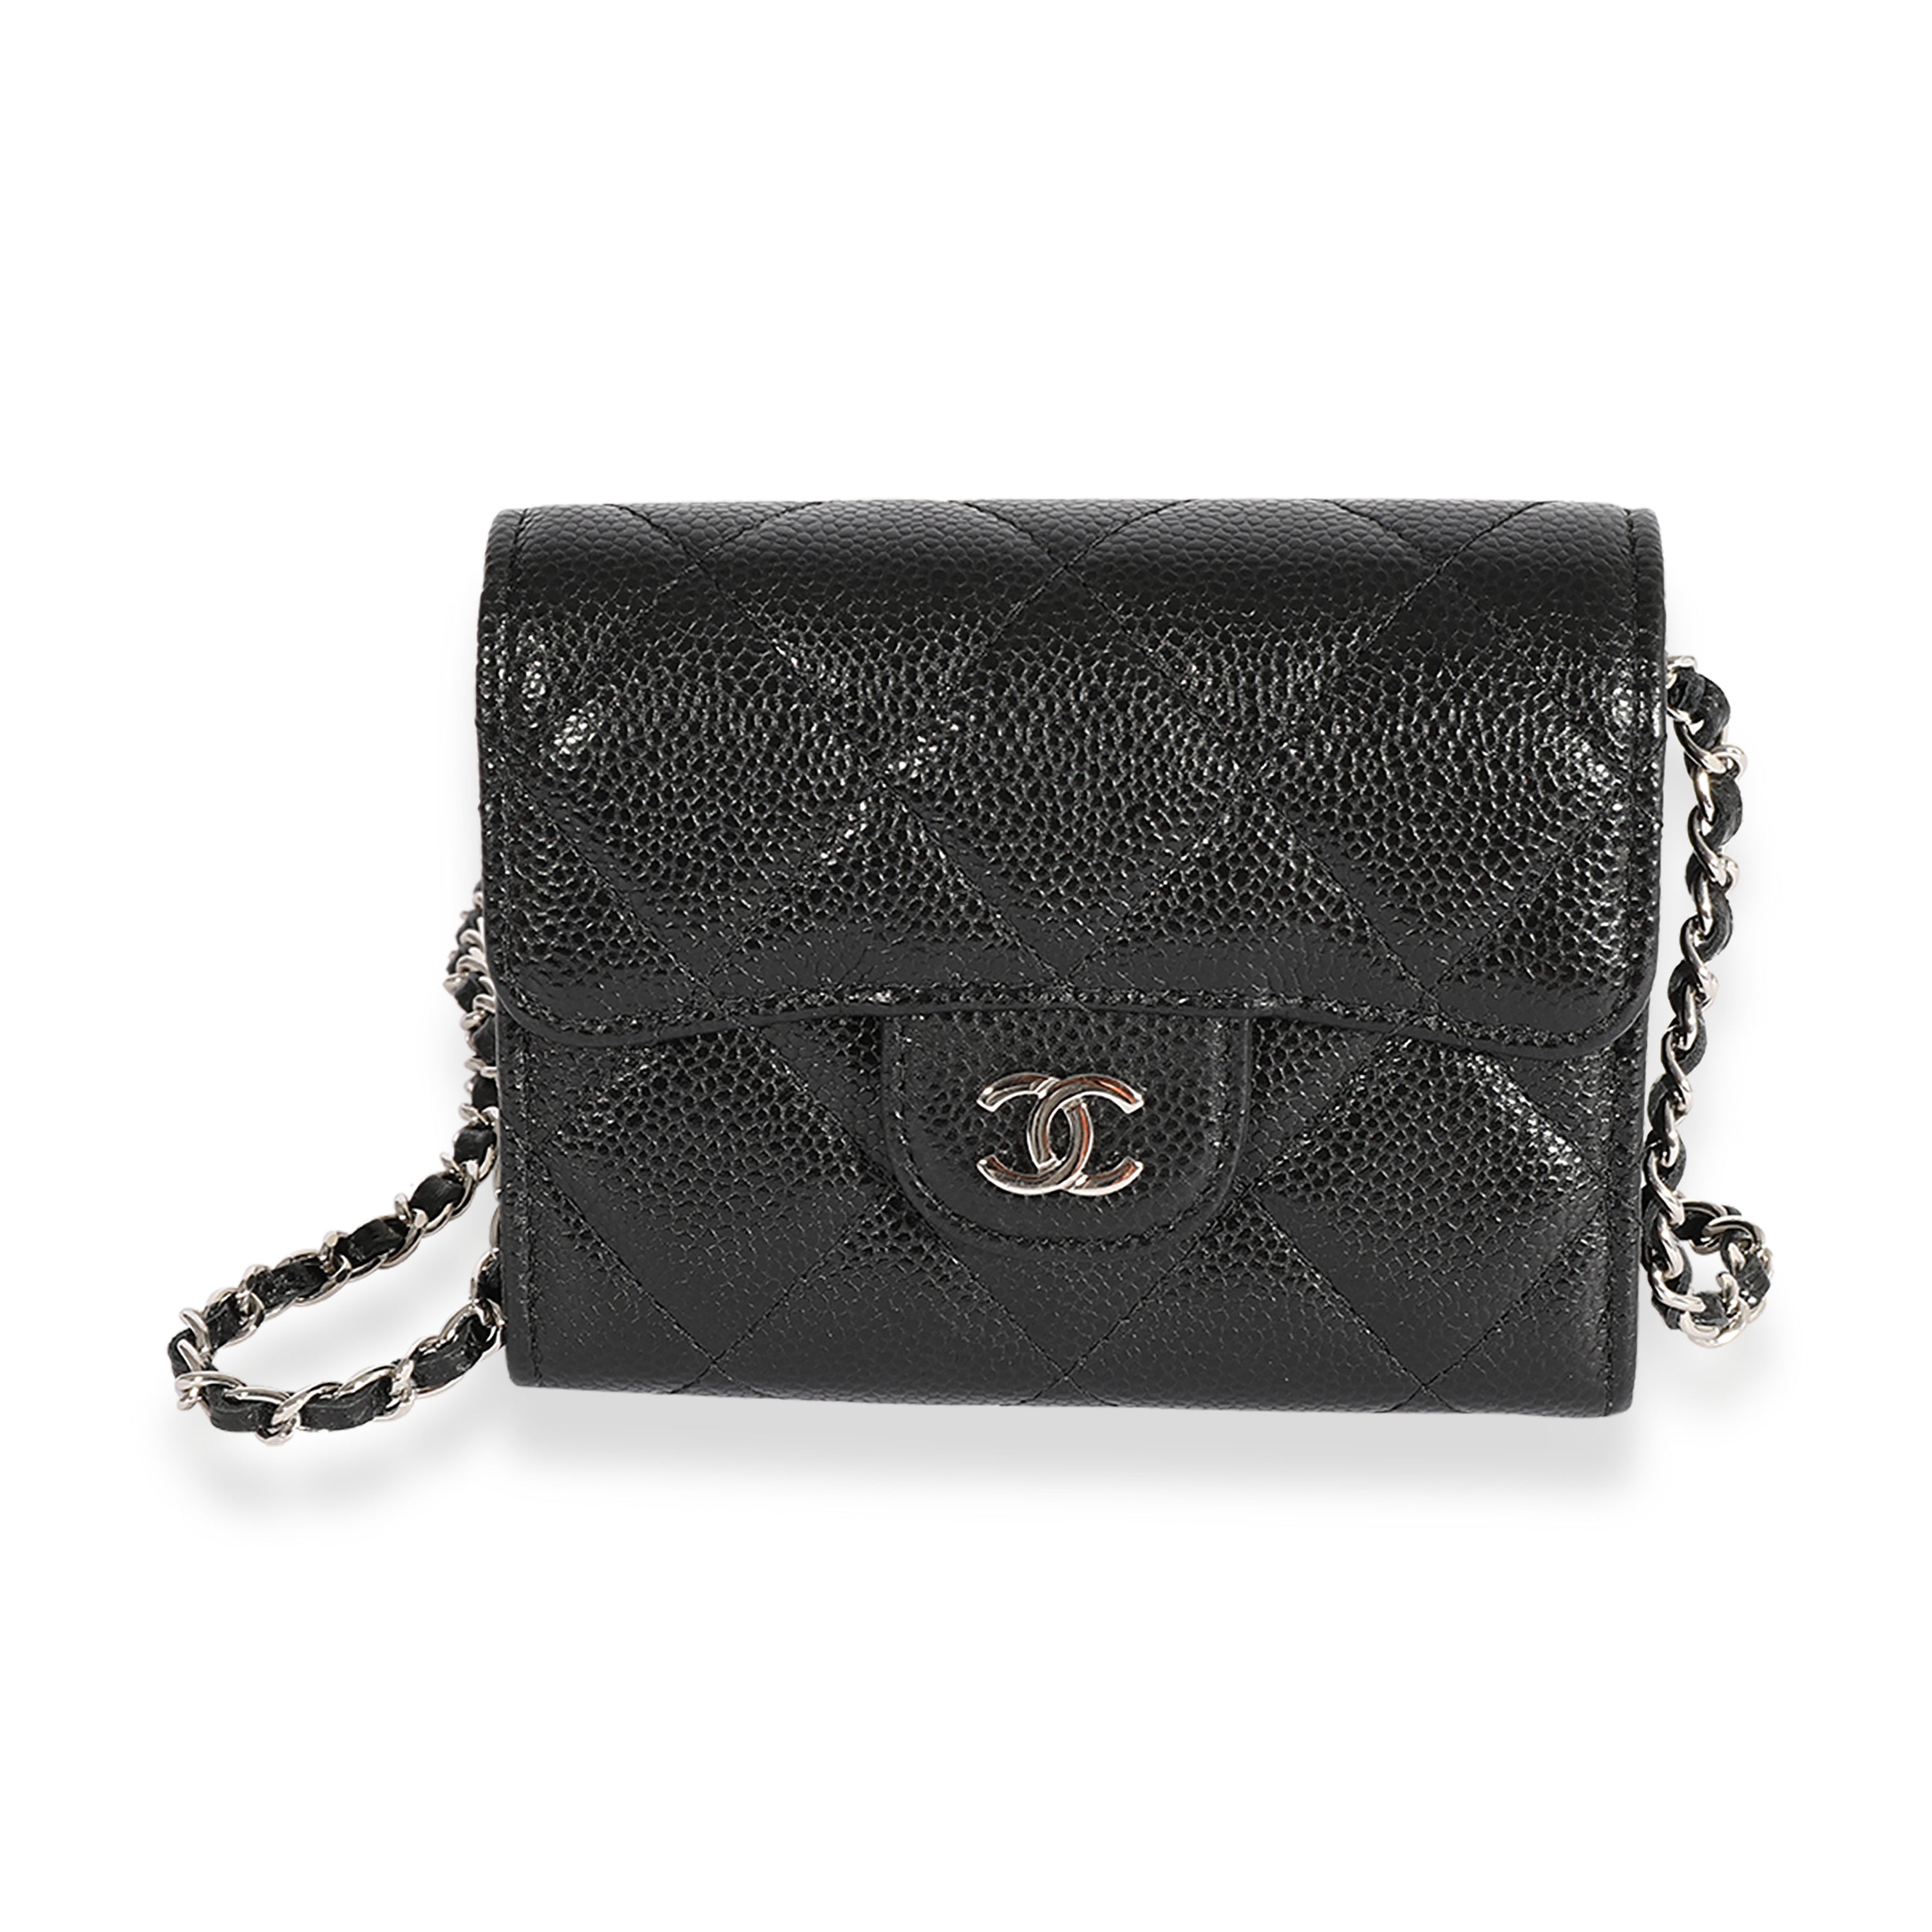 Chanel Quilted Cc Chain Handle Hand Bag Black Leather Vintage